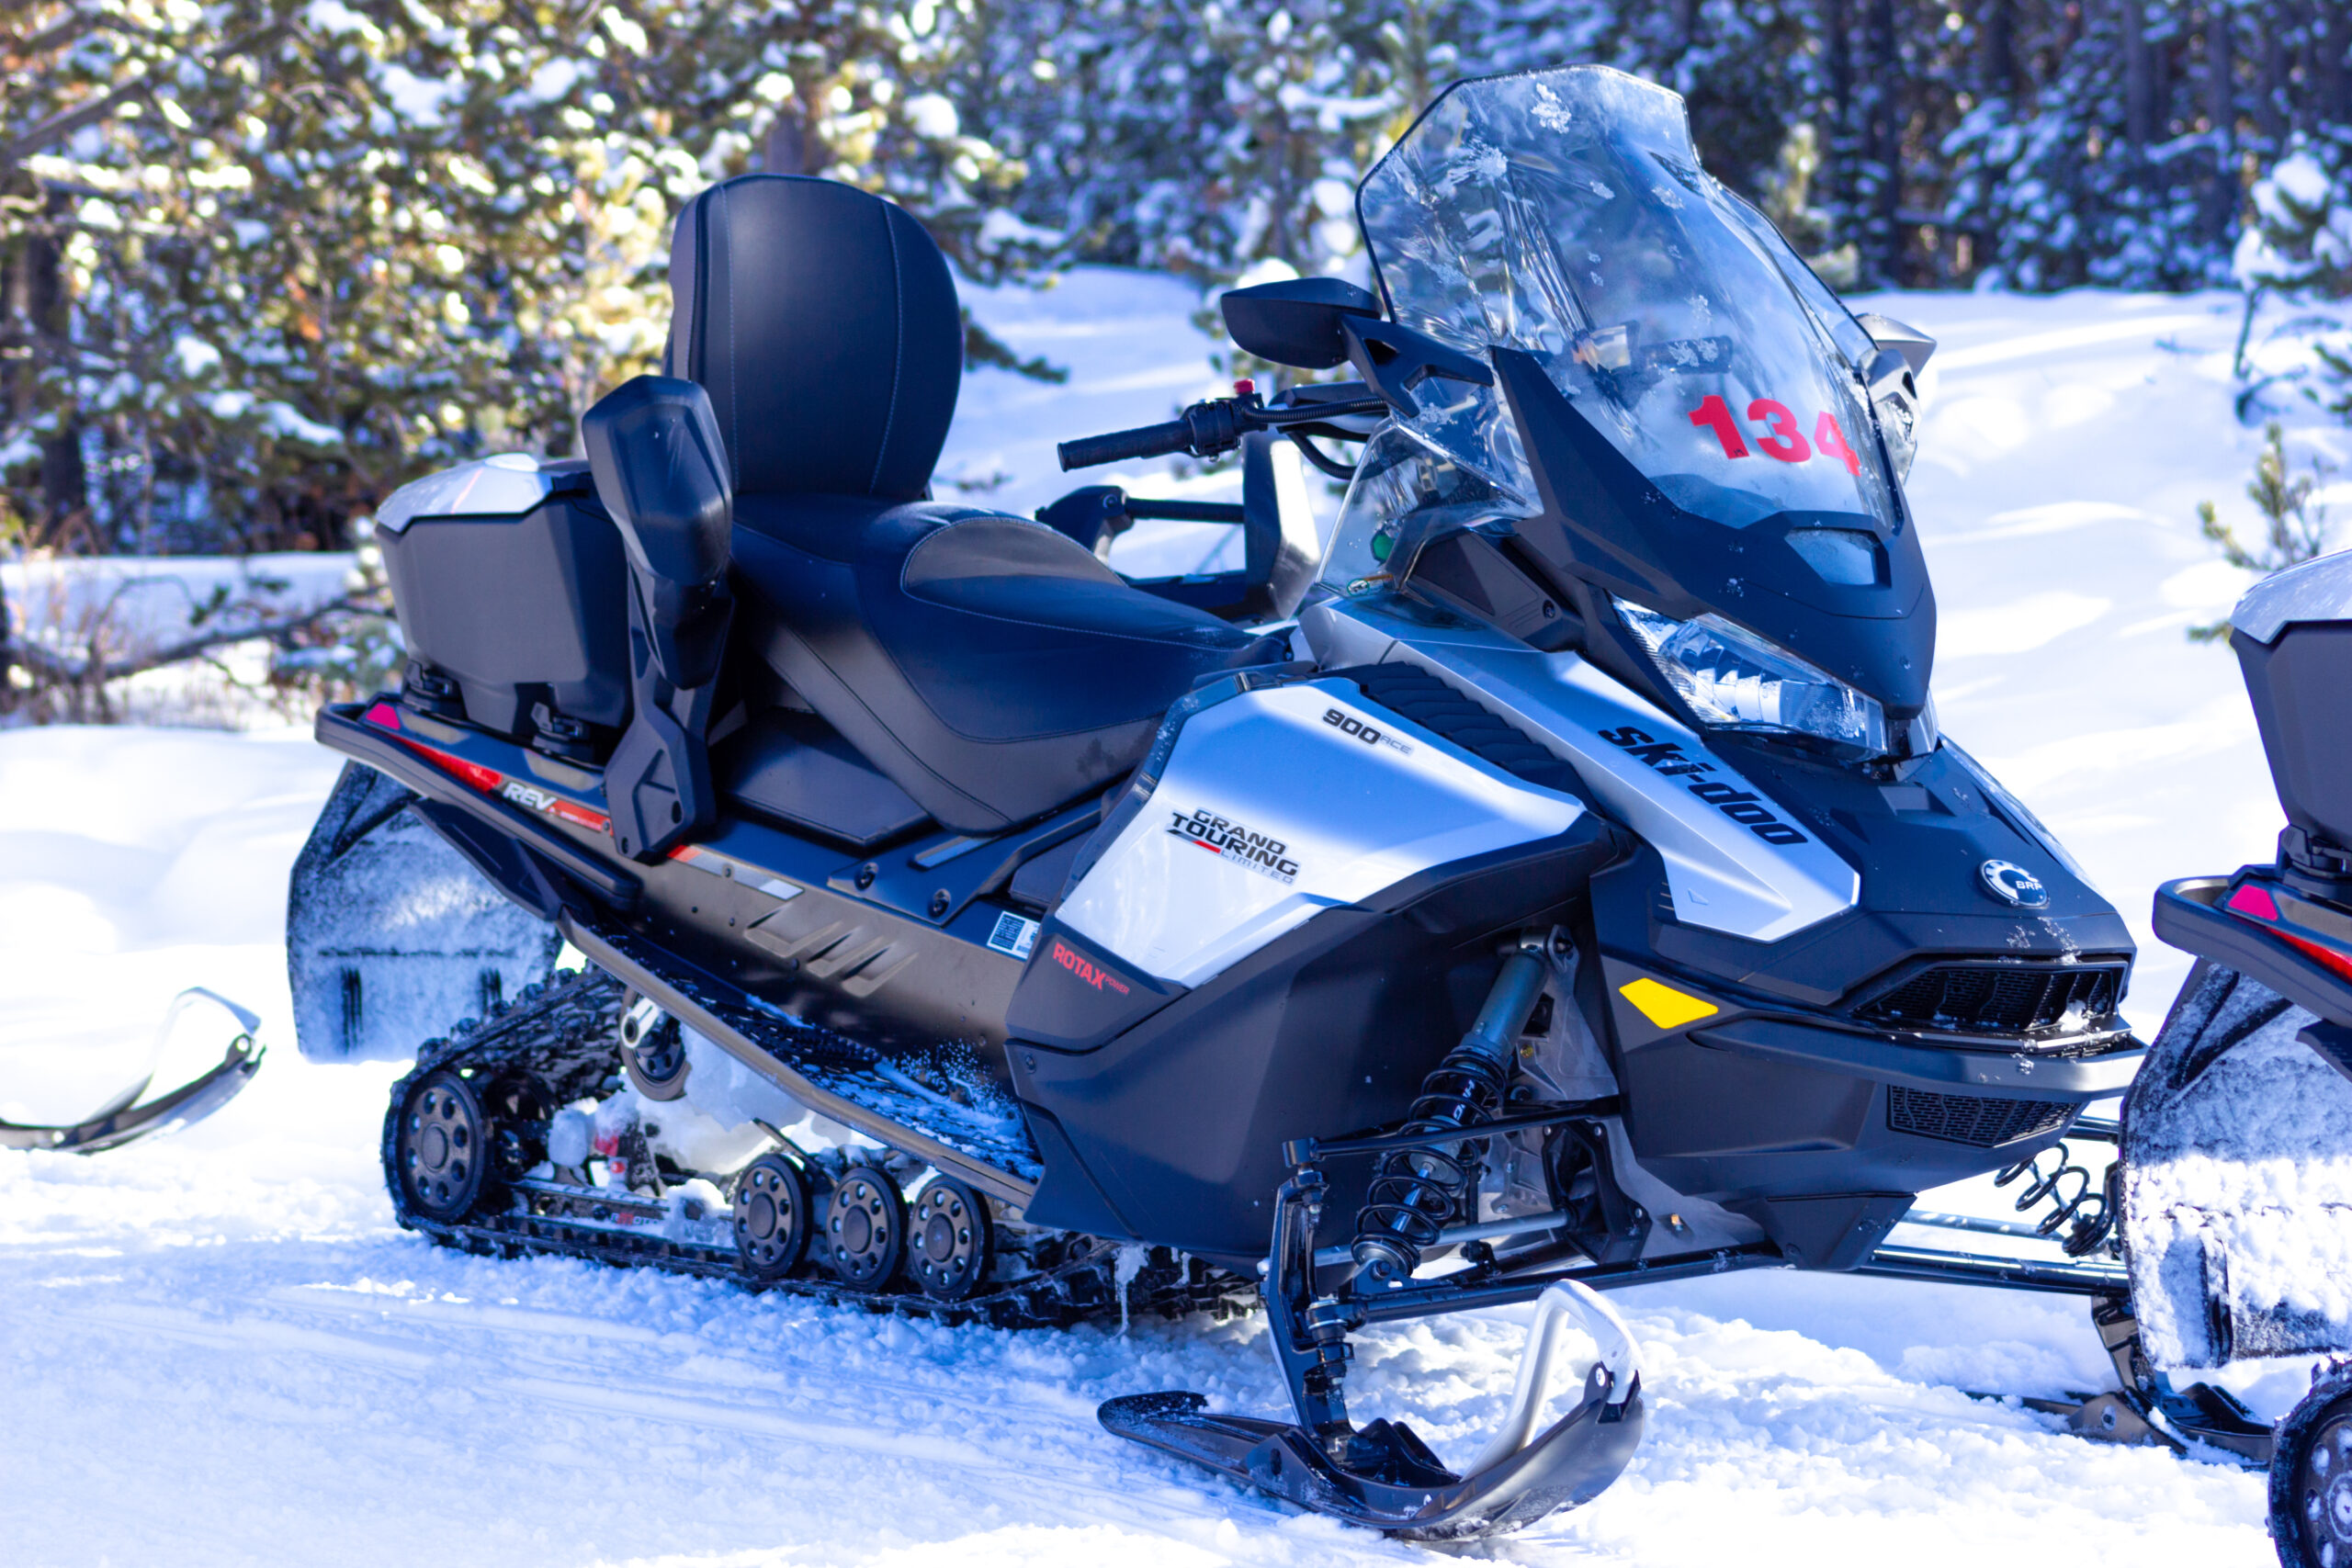 Snowmobile in Yellowstone National Park